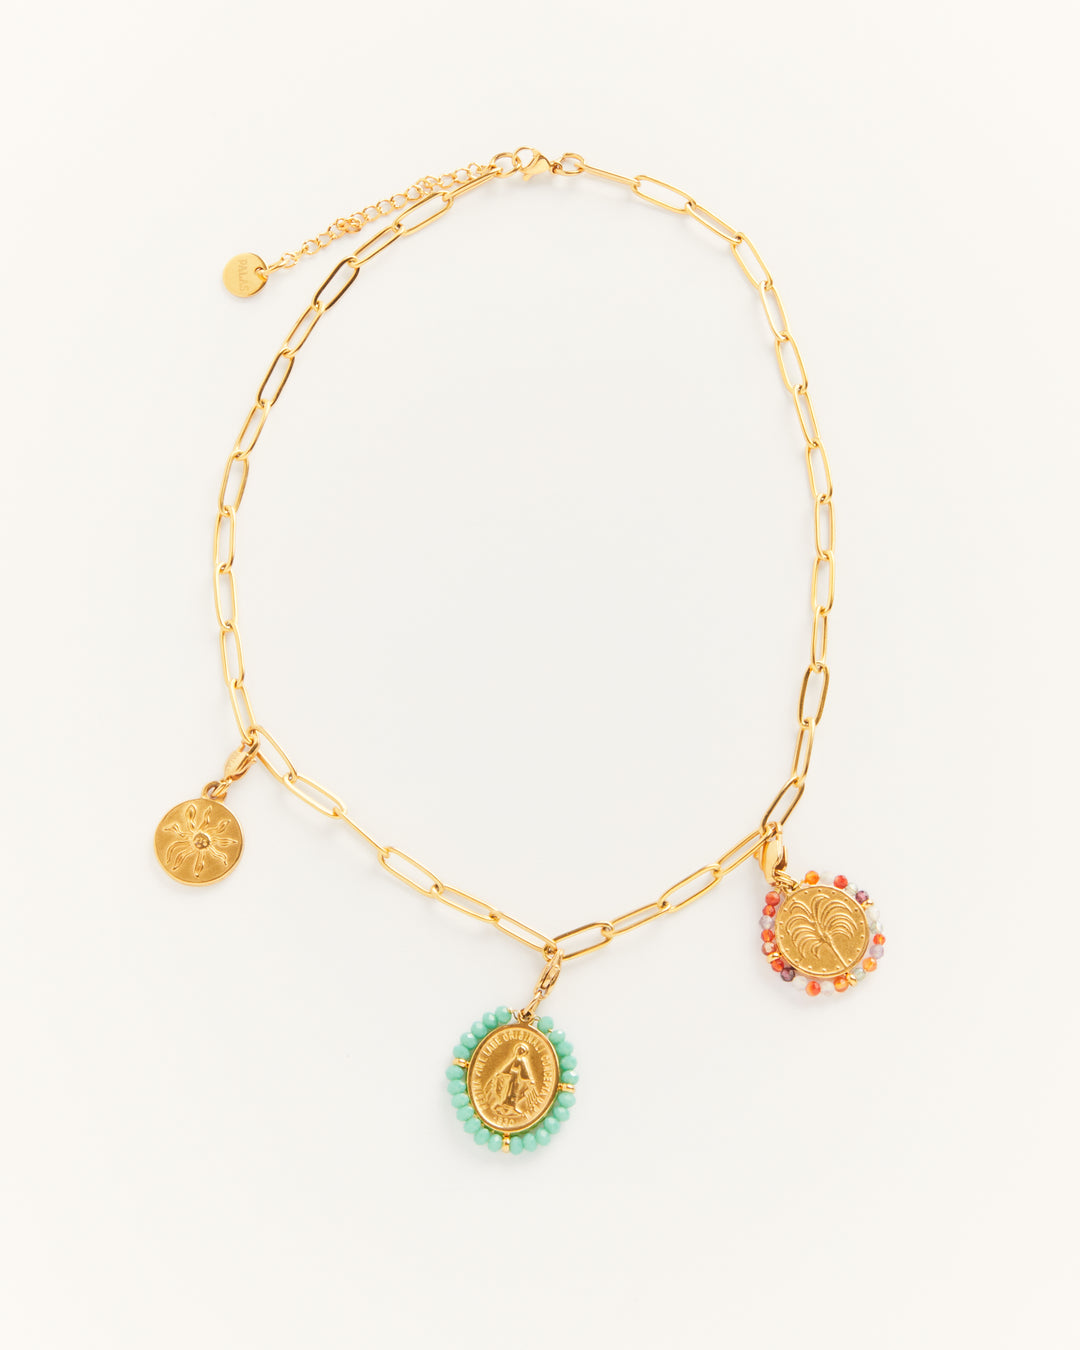 Golden chain necklace and beaded charms - Palas